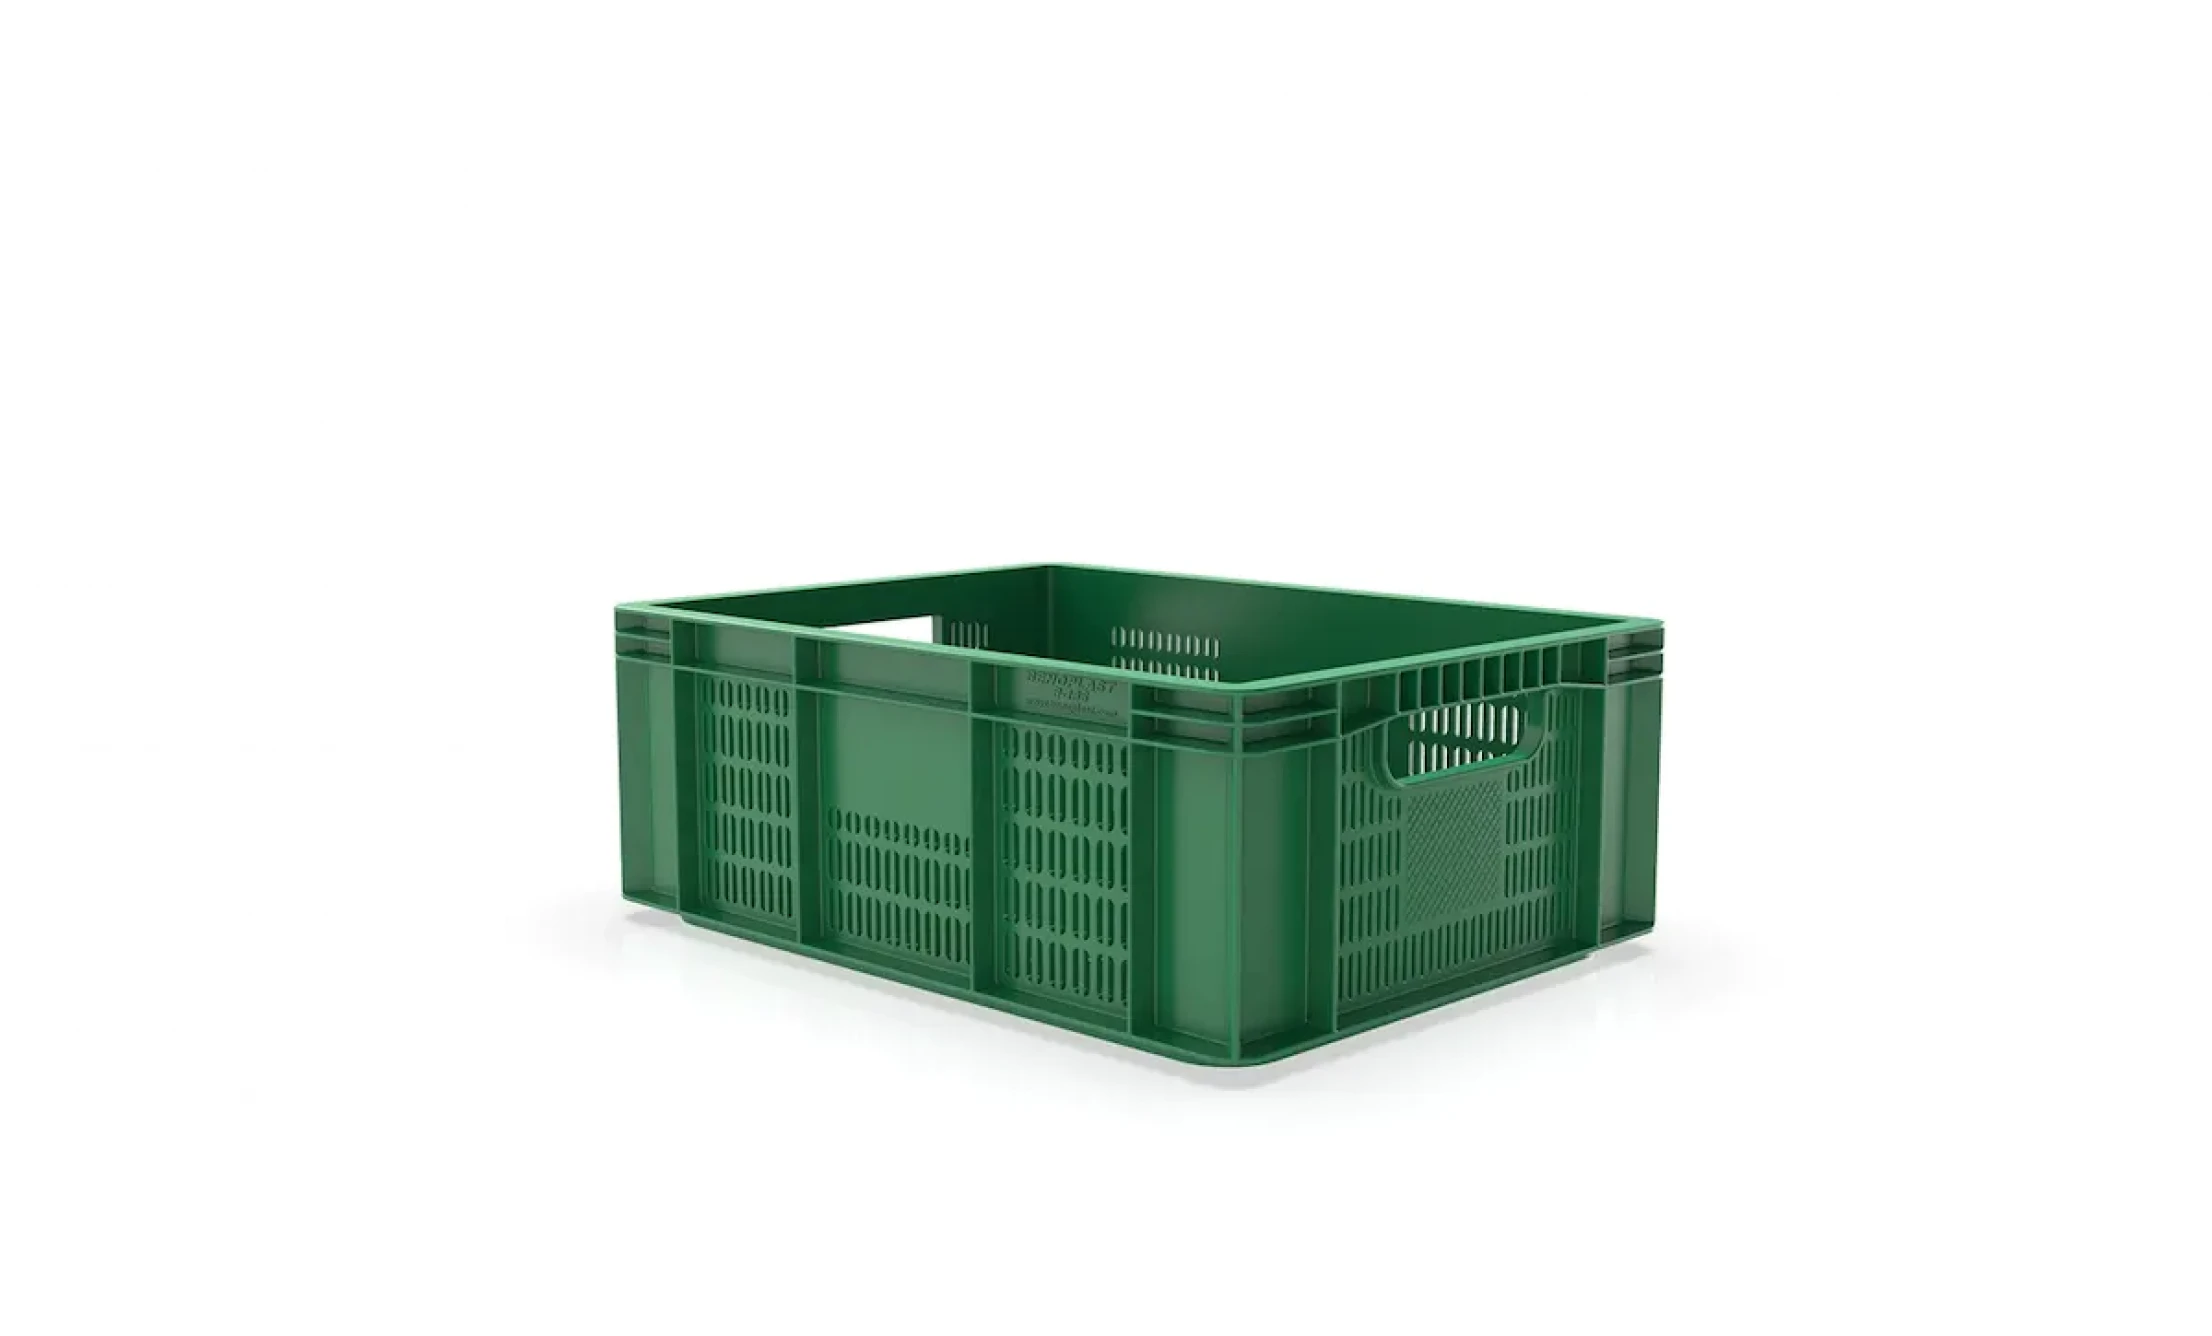 Cherry Crate Types and Prices